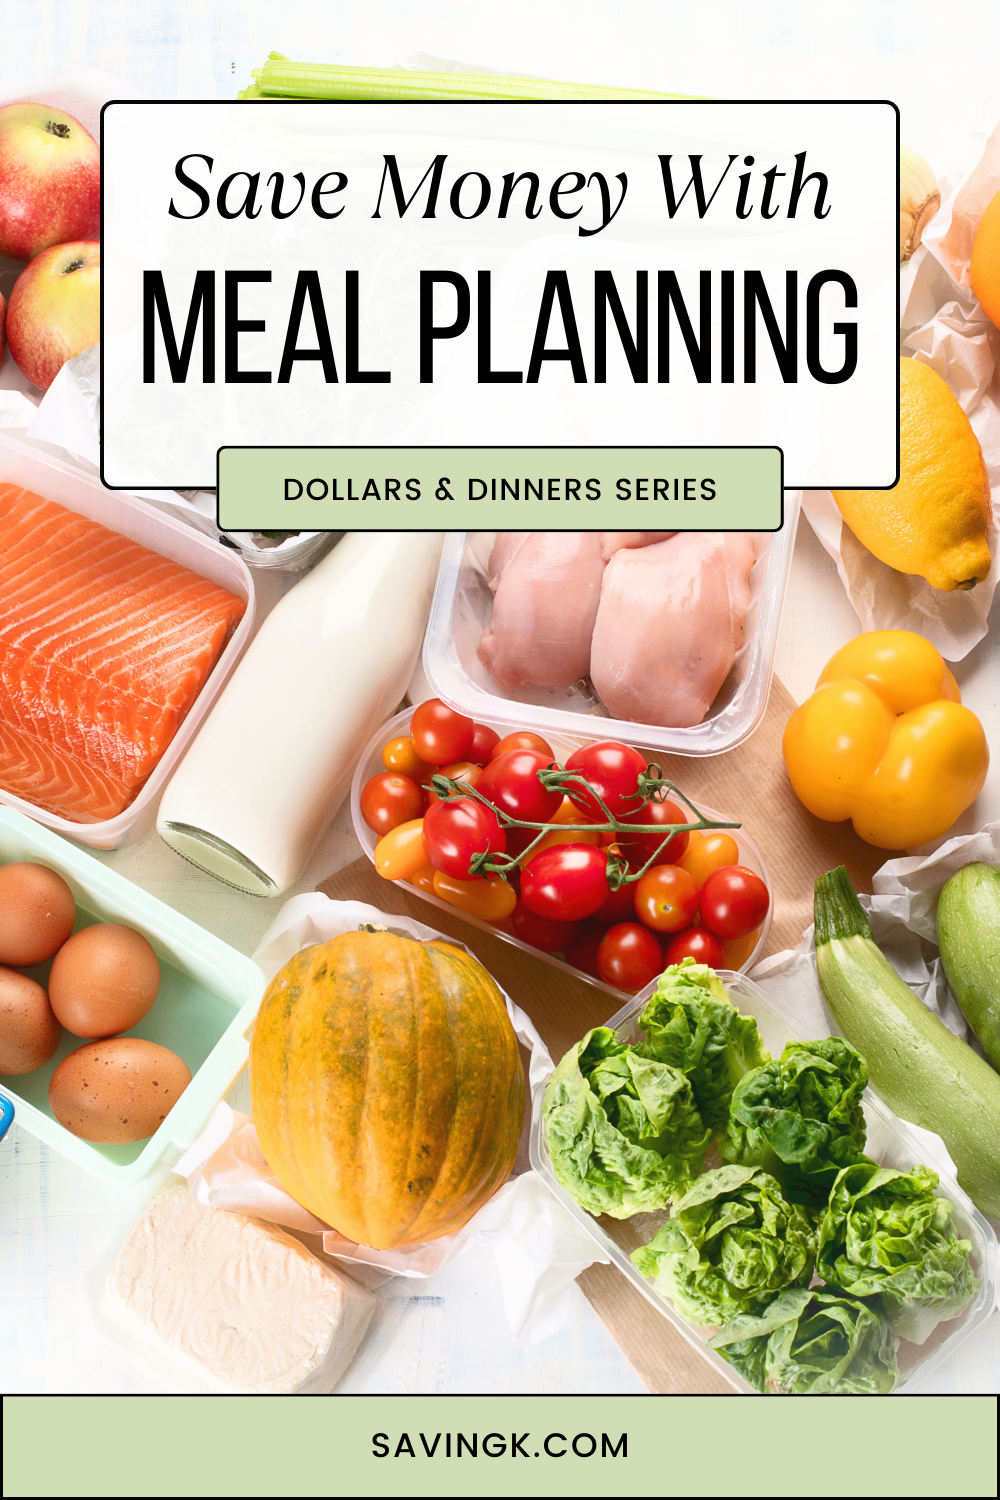 How Meal Planning Can Save You Money